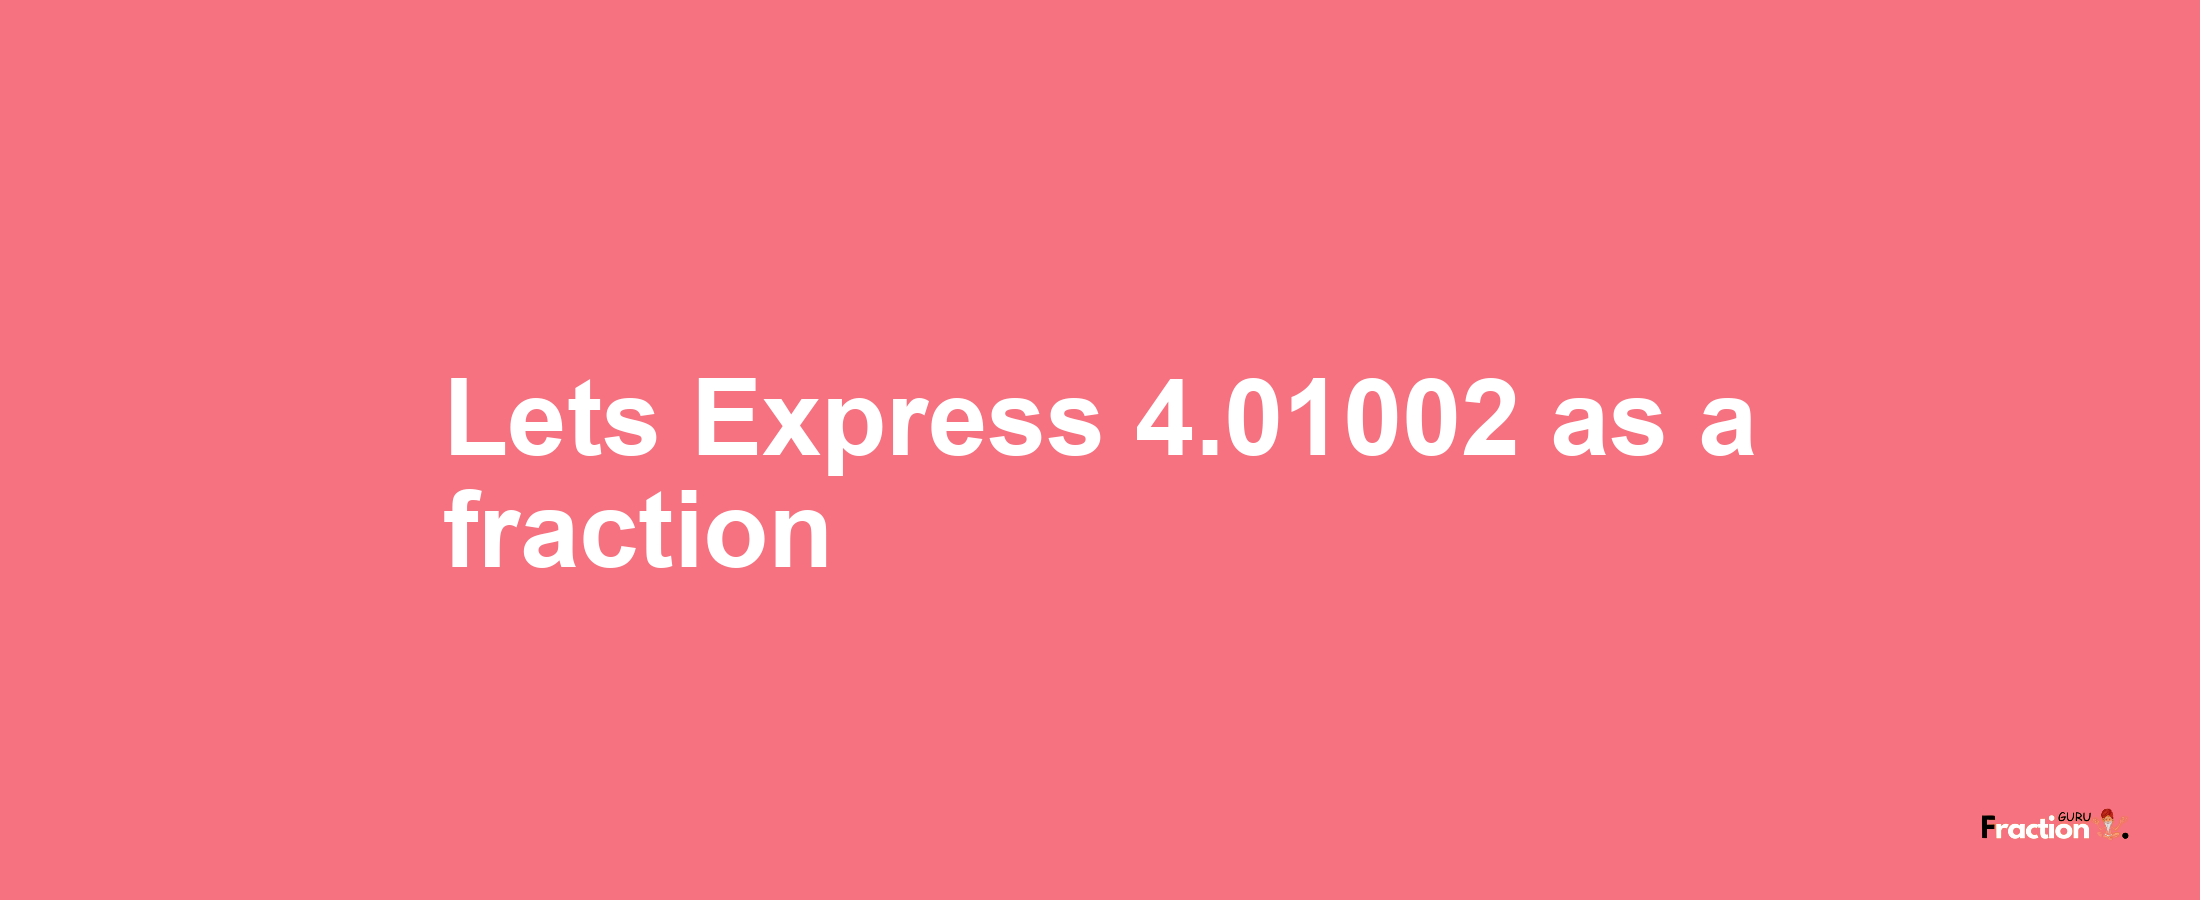 Lets Express 4.01002 as afraction